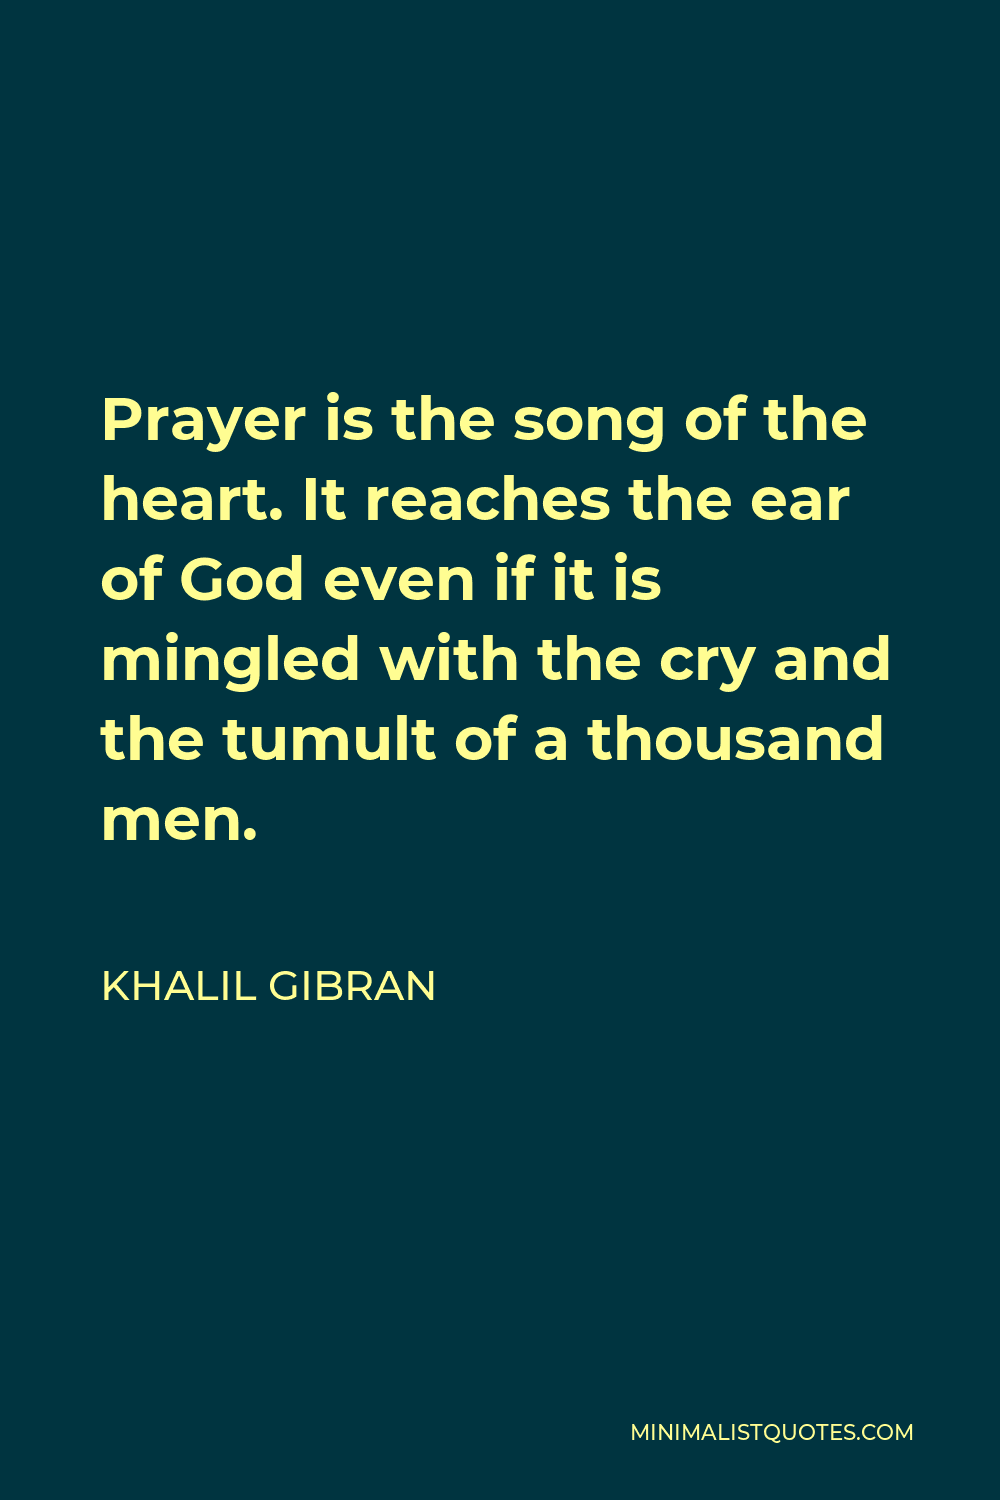 Khalil Gibran Quote - Prayer is the song of the heart. It reaches the ear of God even if it is mingled with the cry and the tumult of a thousand men.